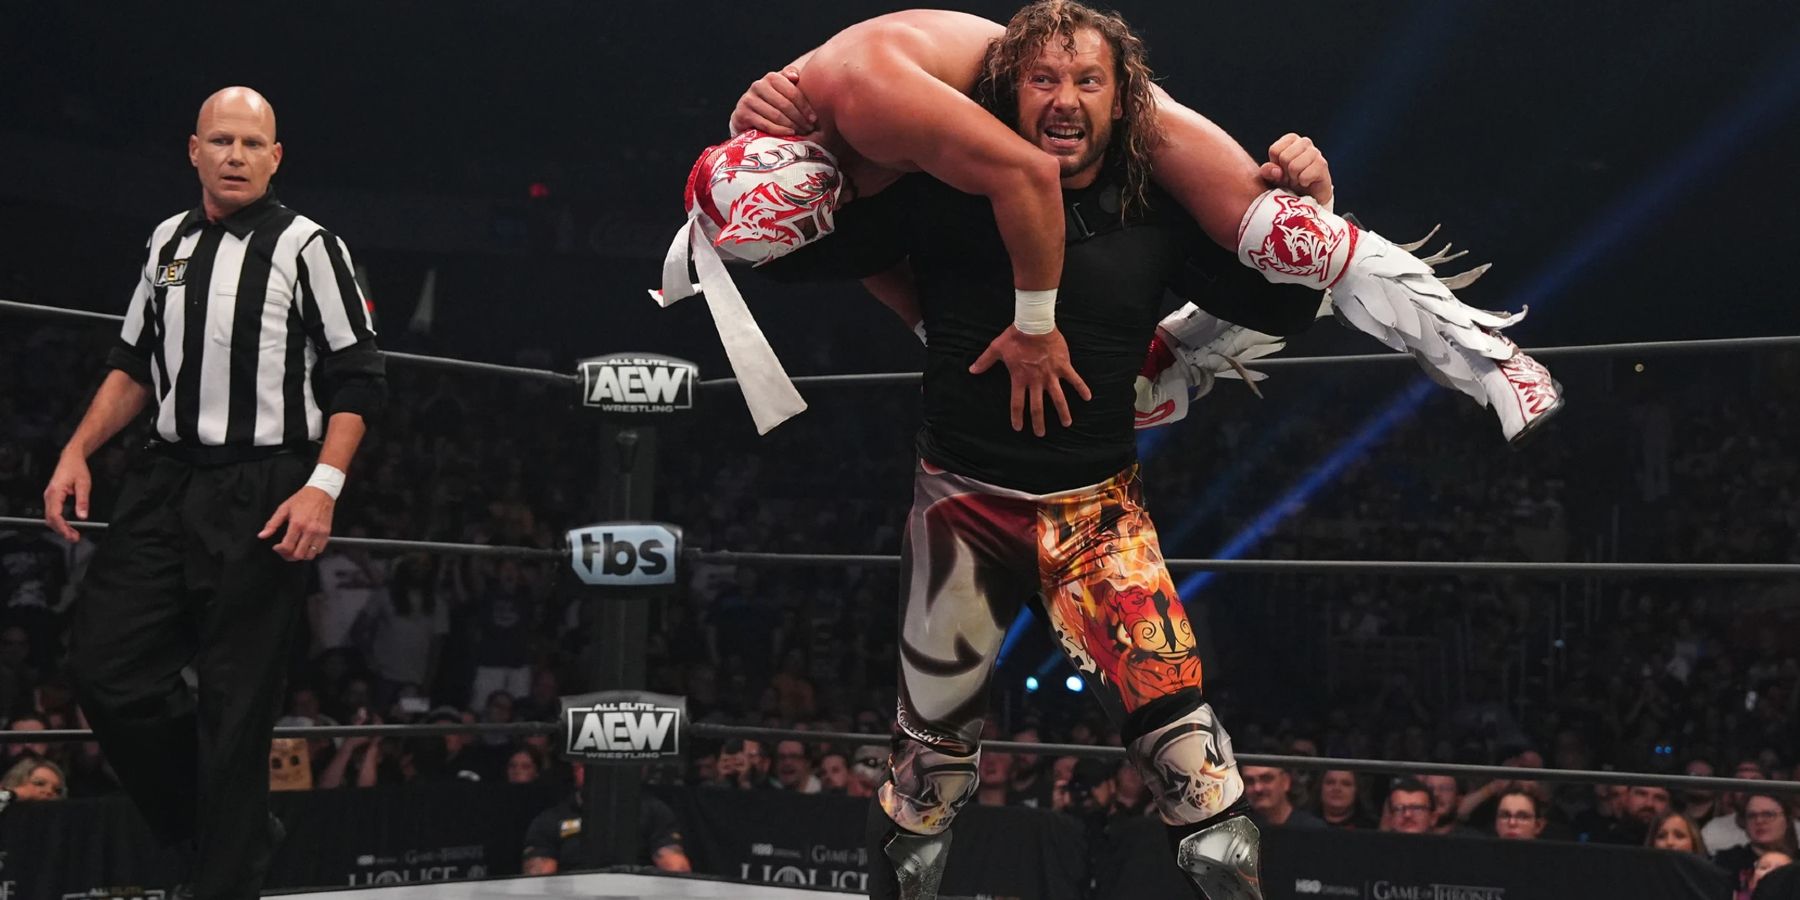 Kenny Omega hoists Rey Fenix onto his shoulders during a match on AEW Dynamite.